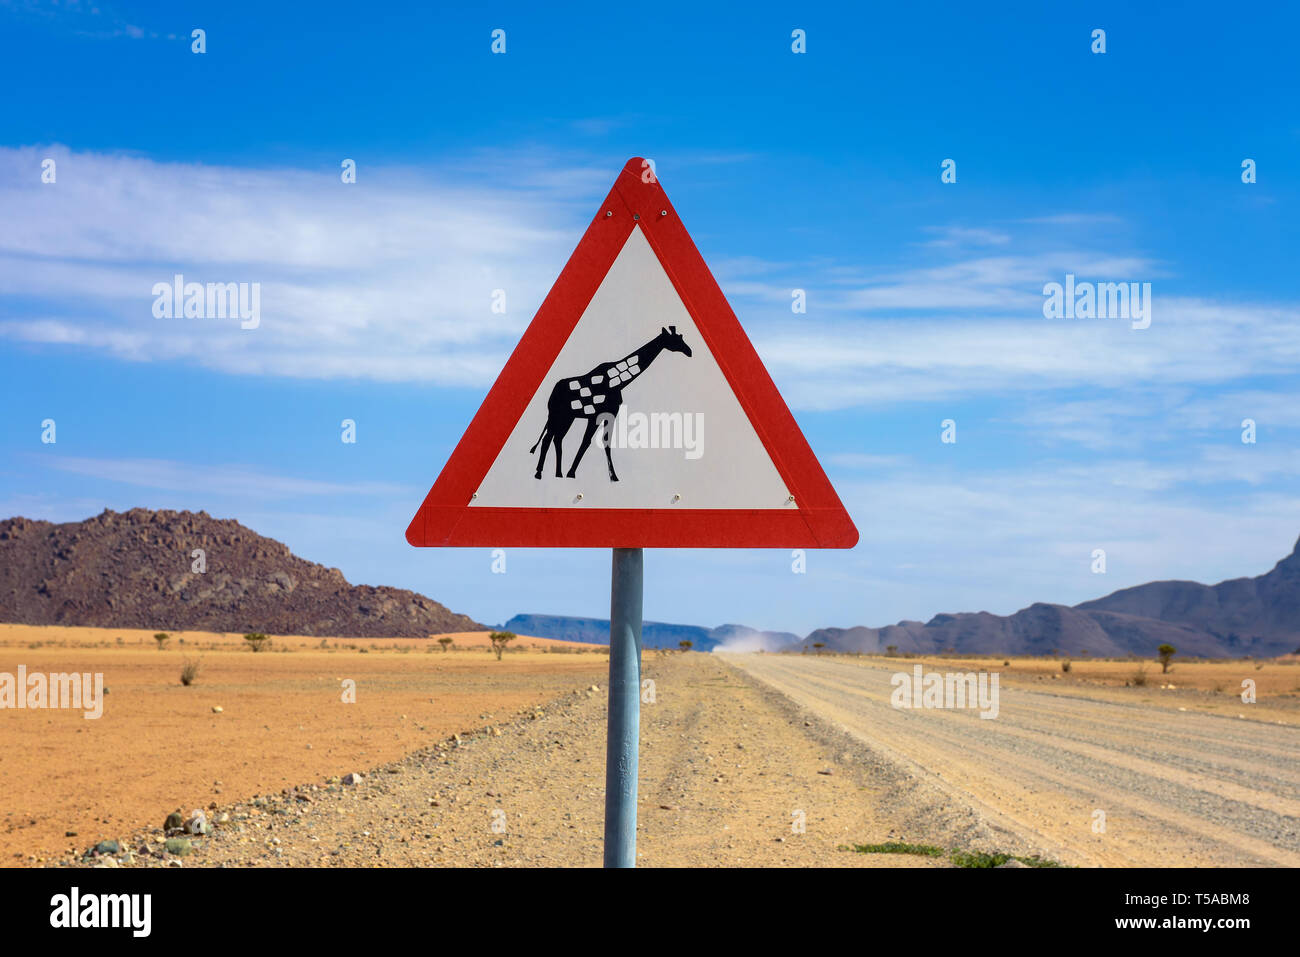 Giraffes crossing warning road sign placed in the desert of Namibia Stock Photo